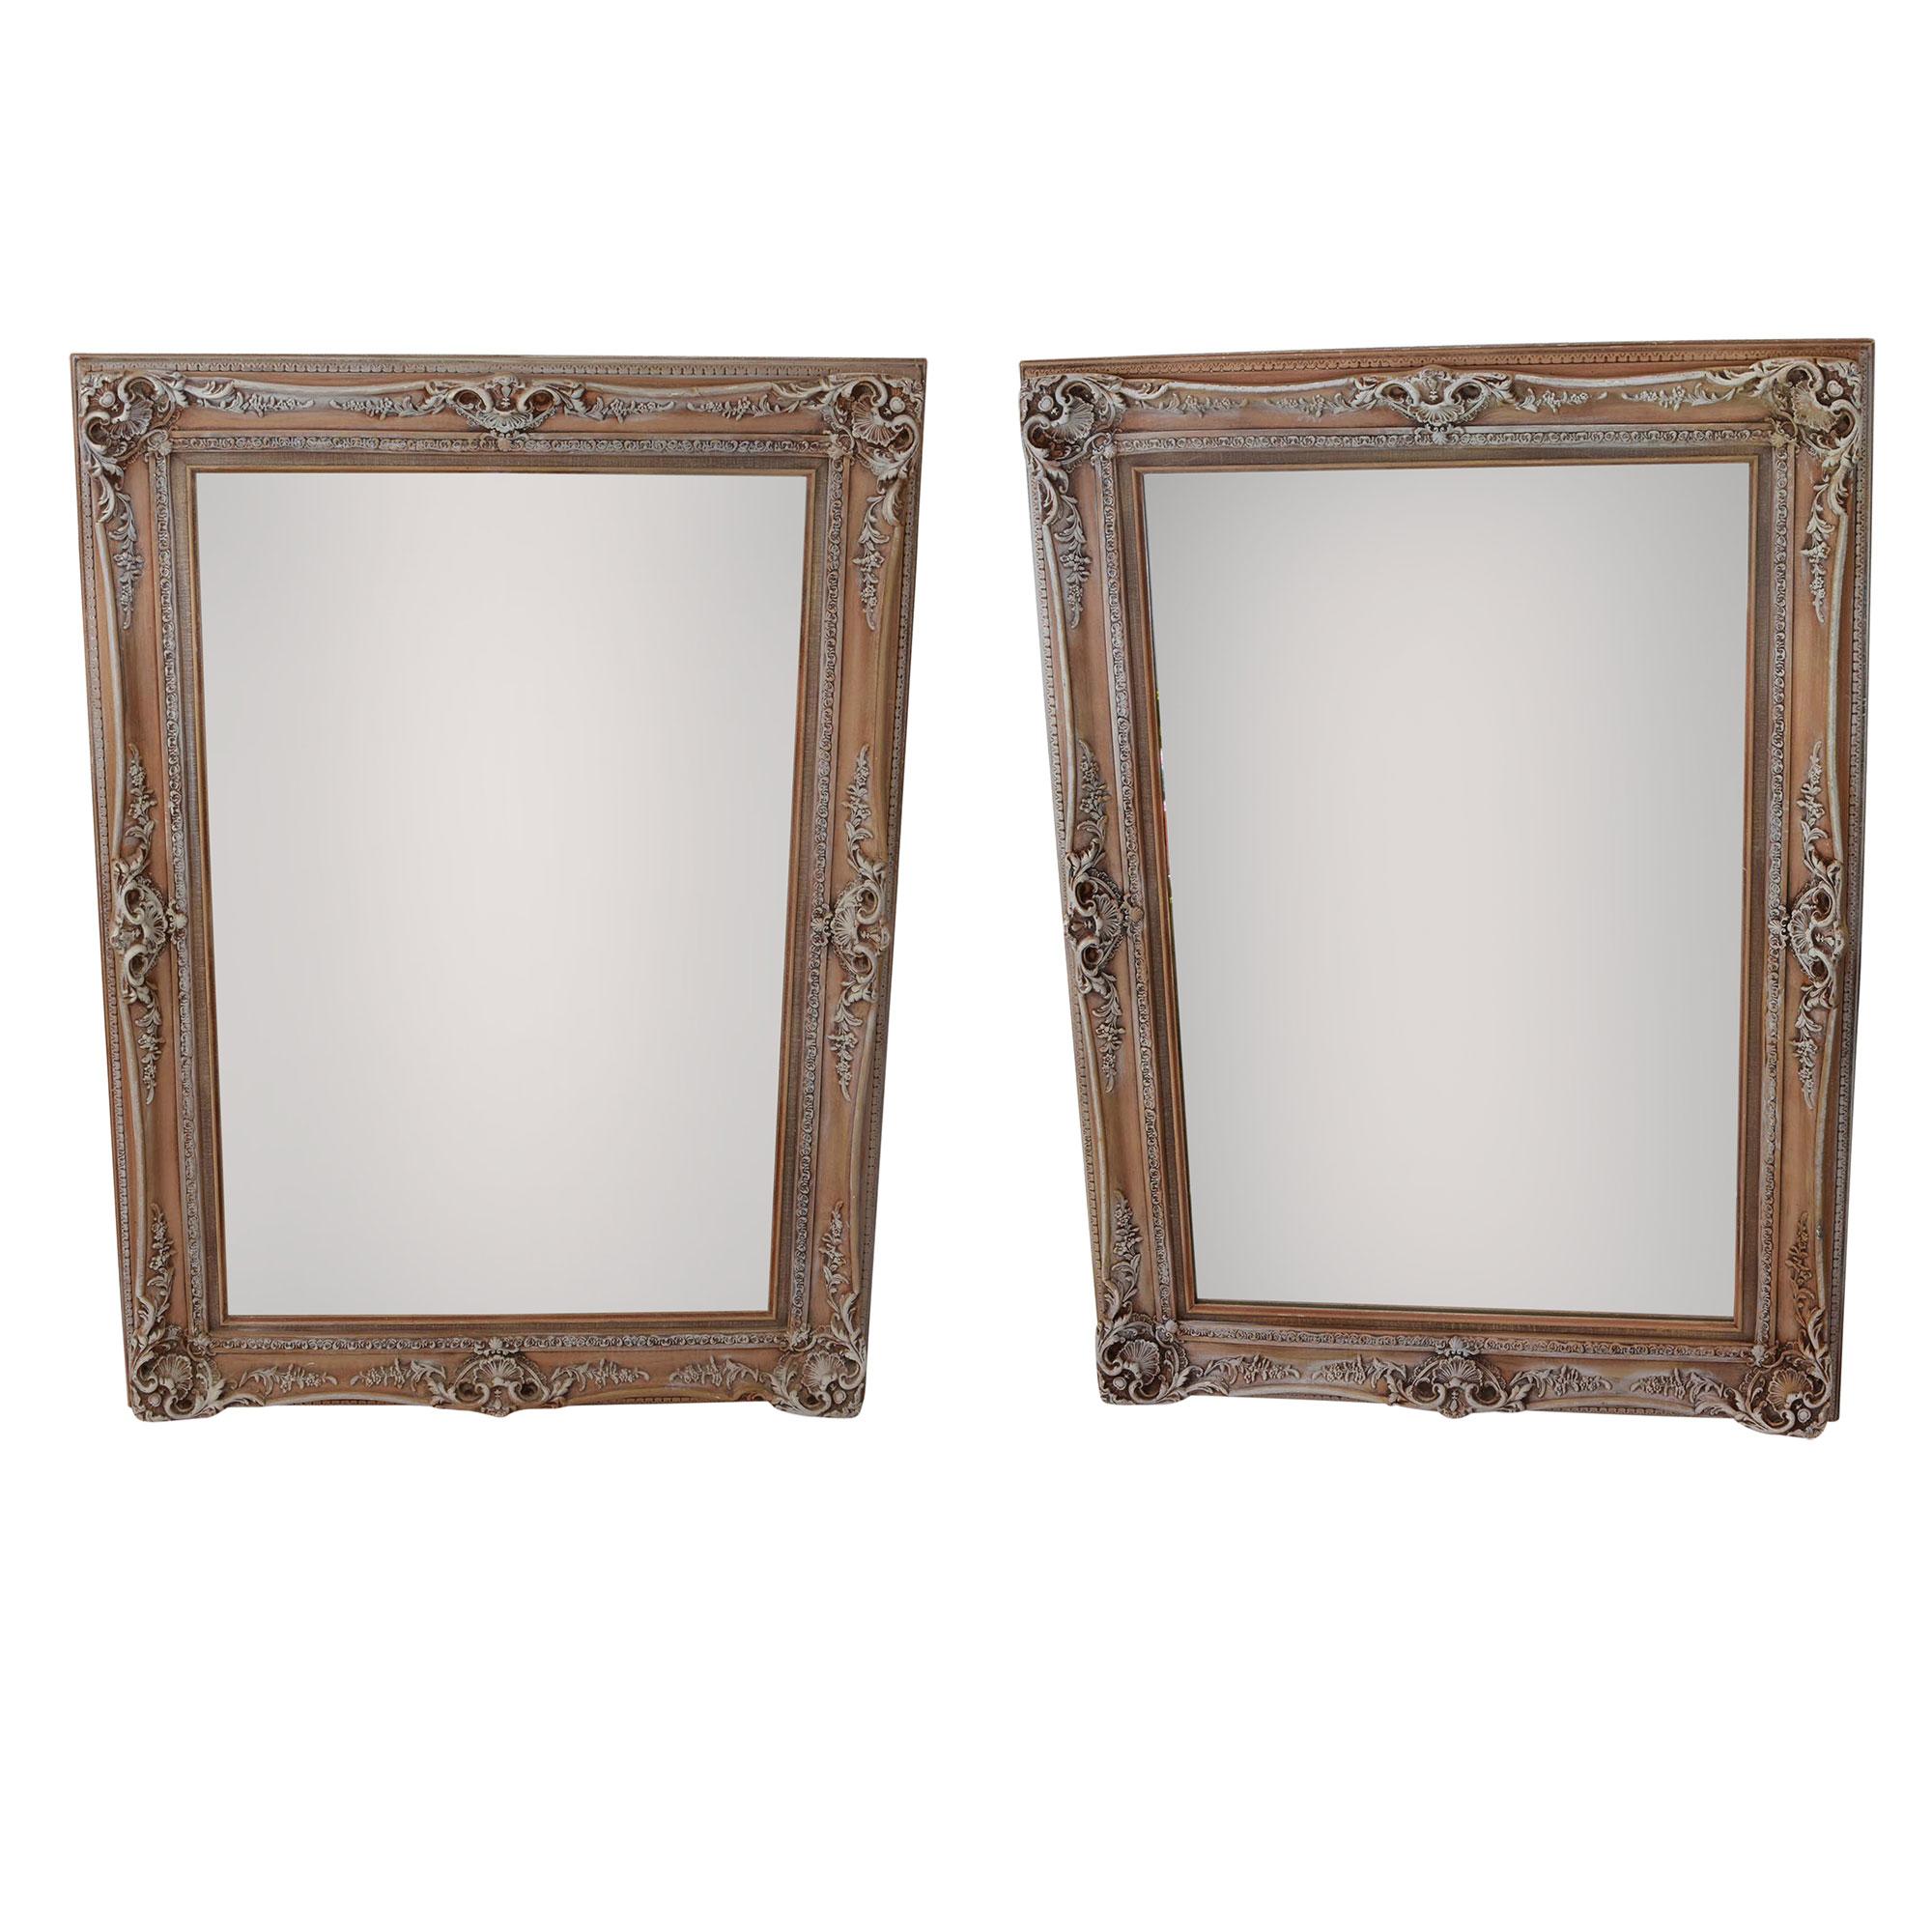 Antique Ornate Frames with New Mirrors, Pair For Sale